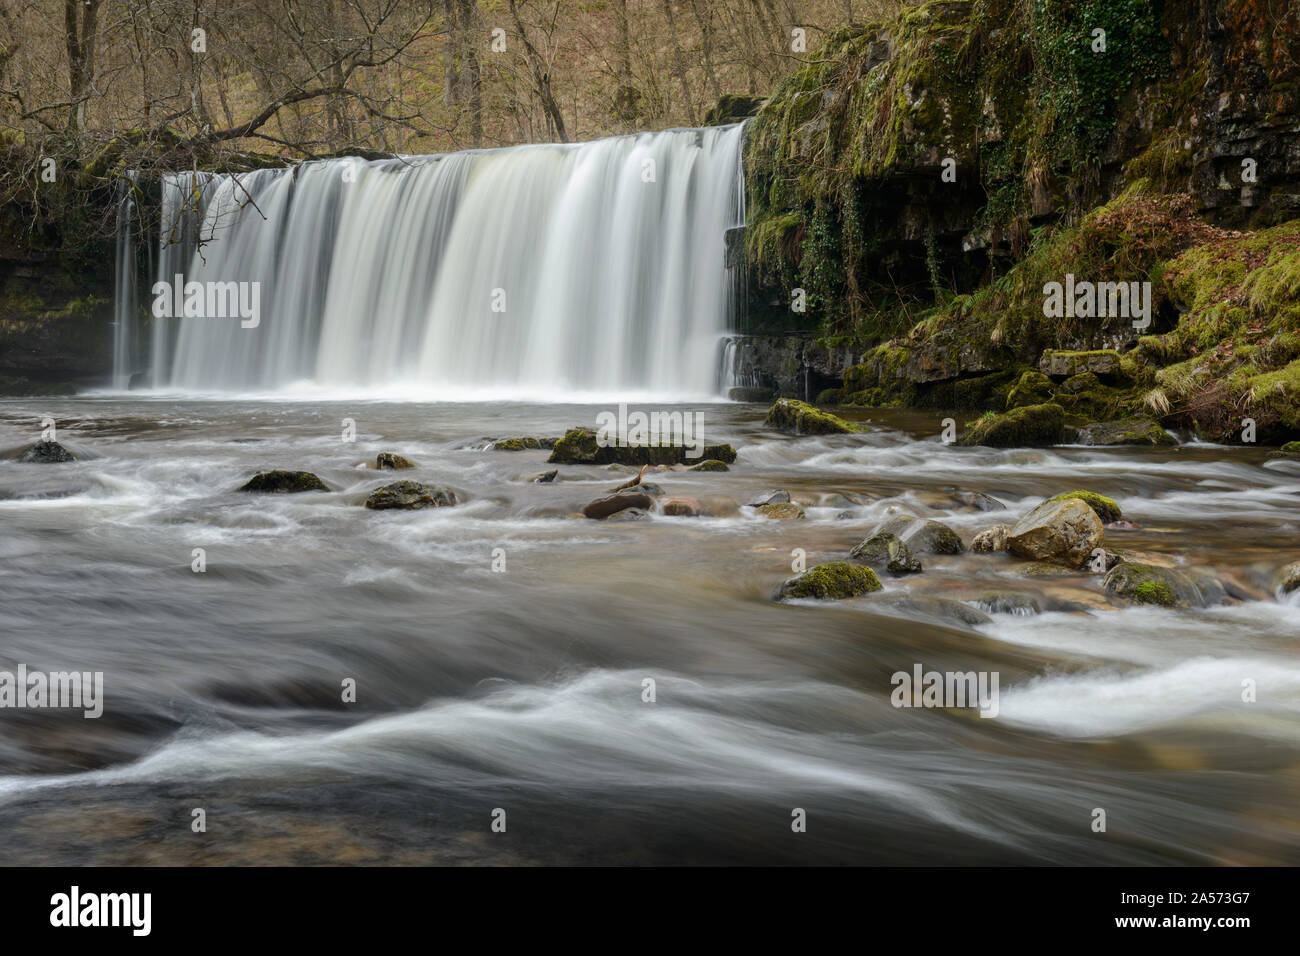 The Sgwd Ddwli waterfall in the Ystradfellte valley, Brecon Beacons Stock Photo